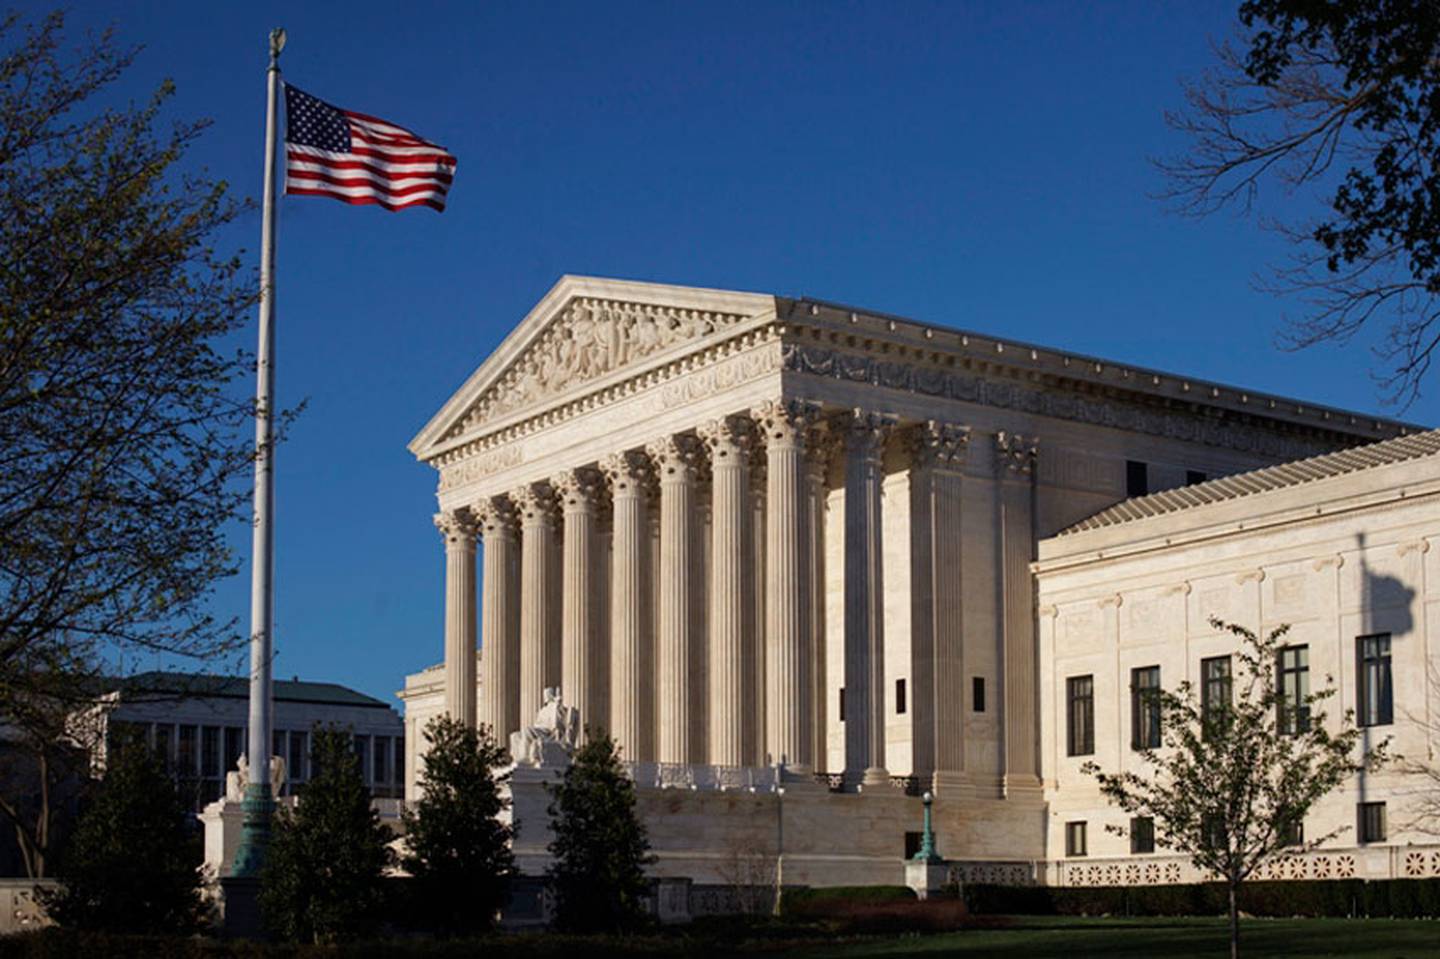 The Supreme Court will analyze the arguments on February 21.